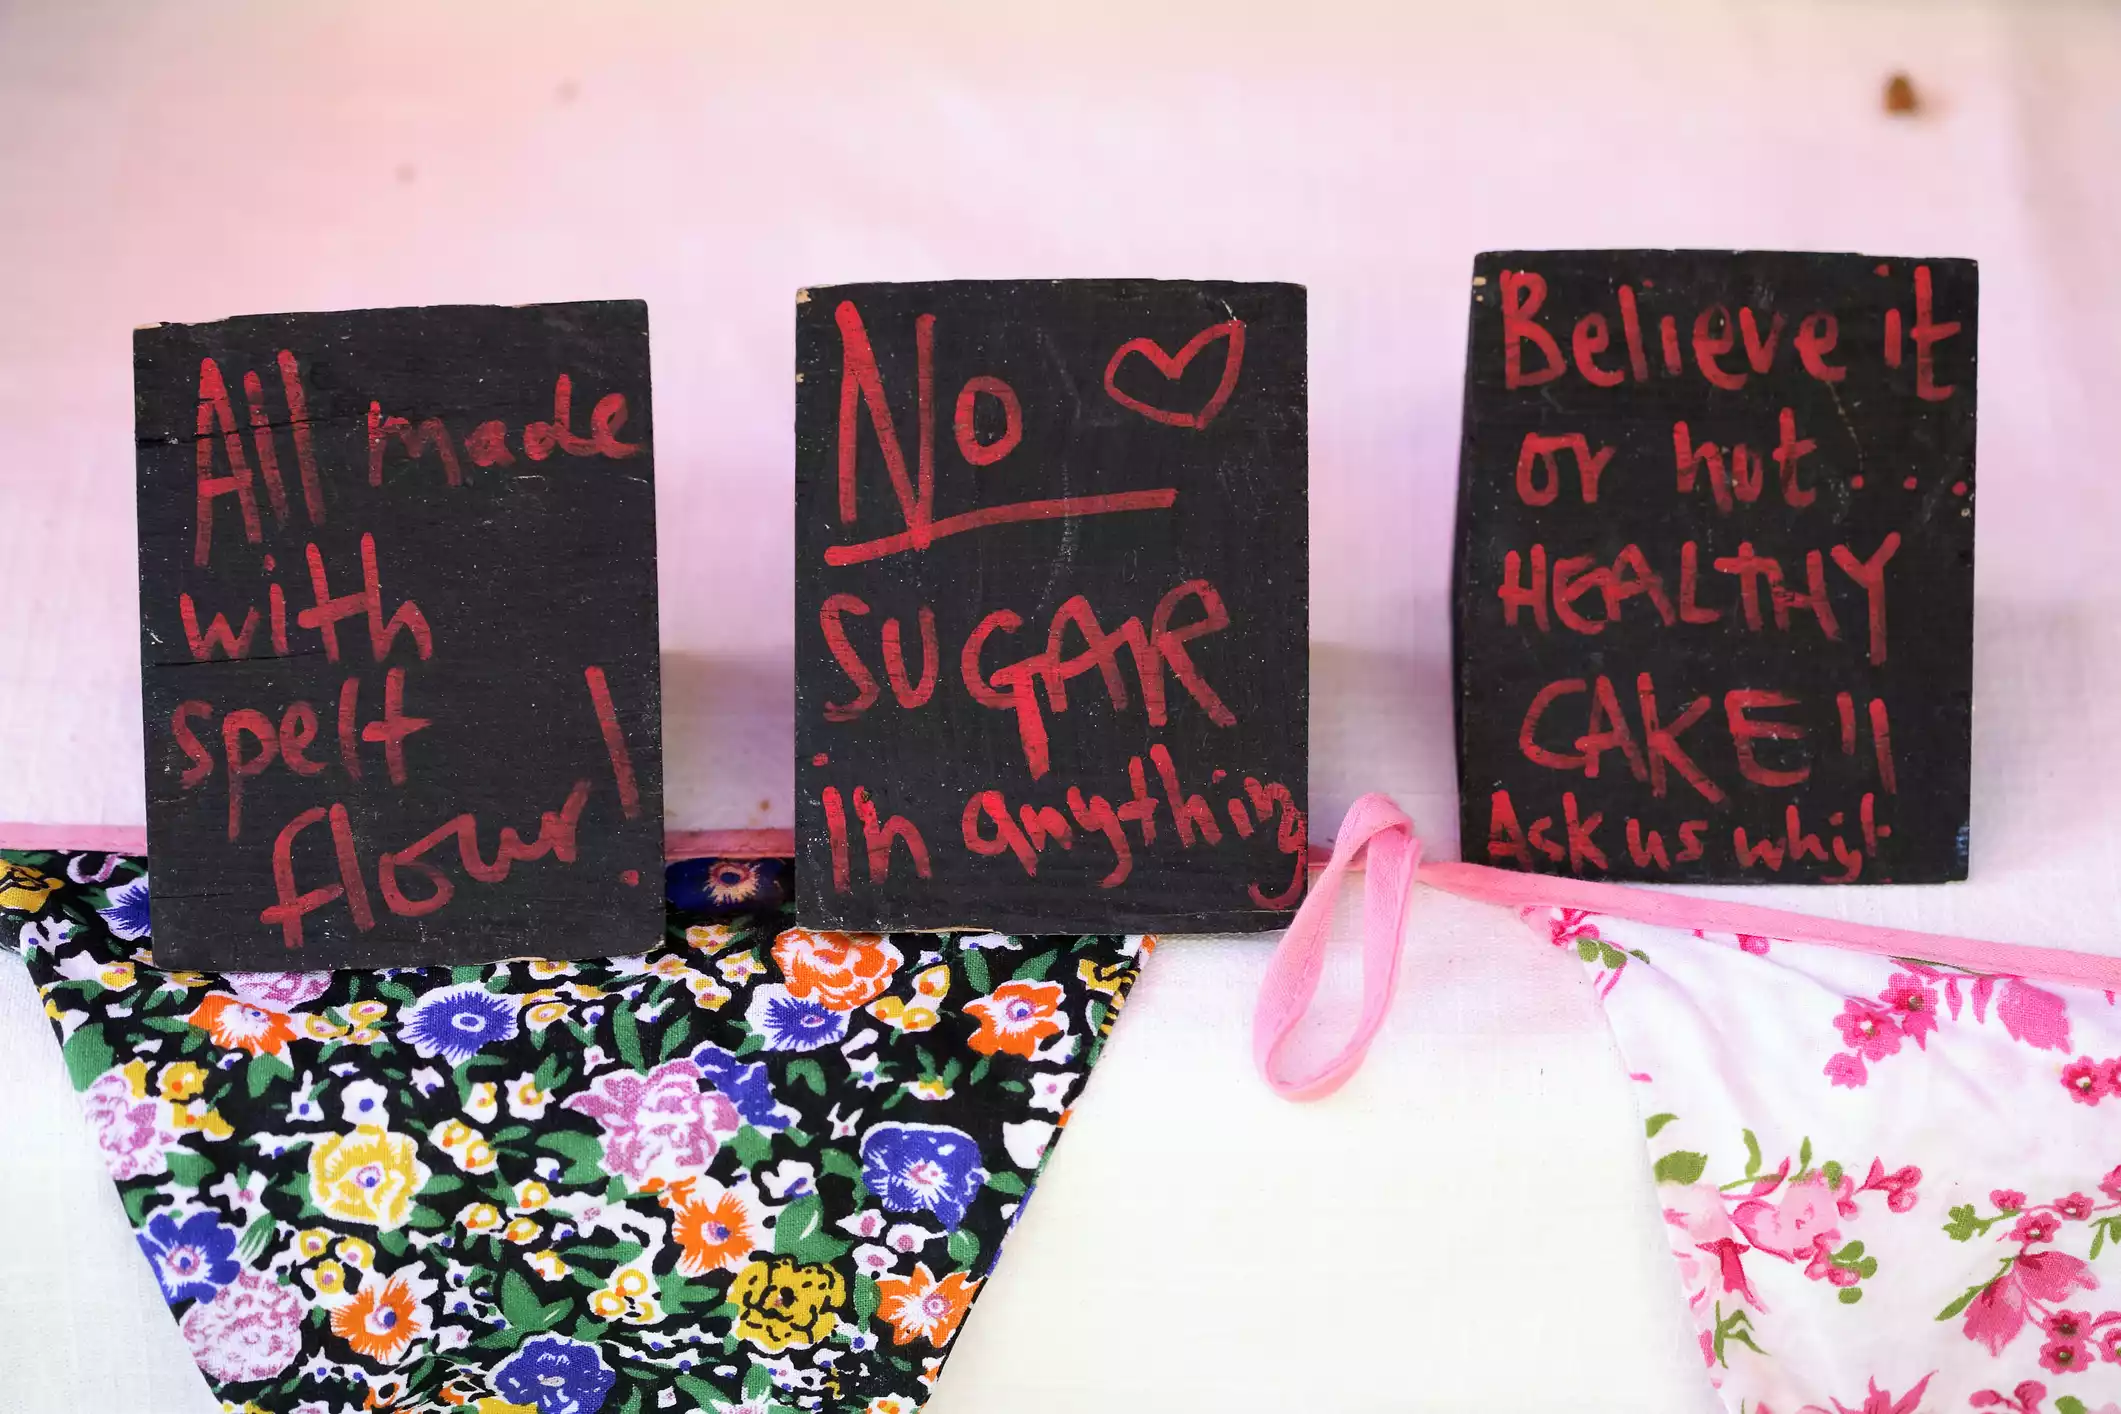 Healthy cake signs